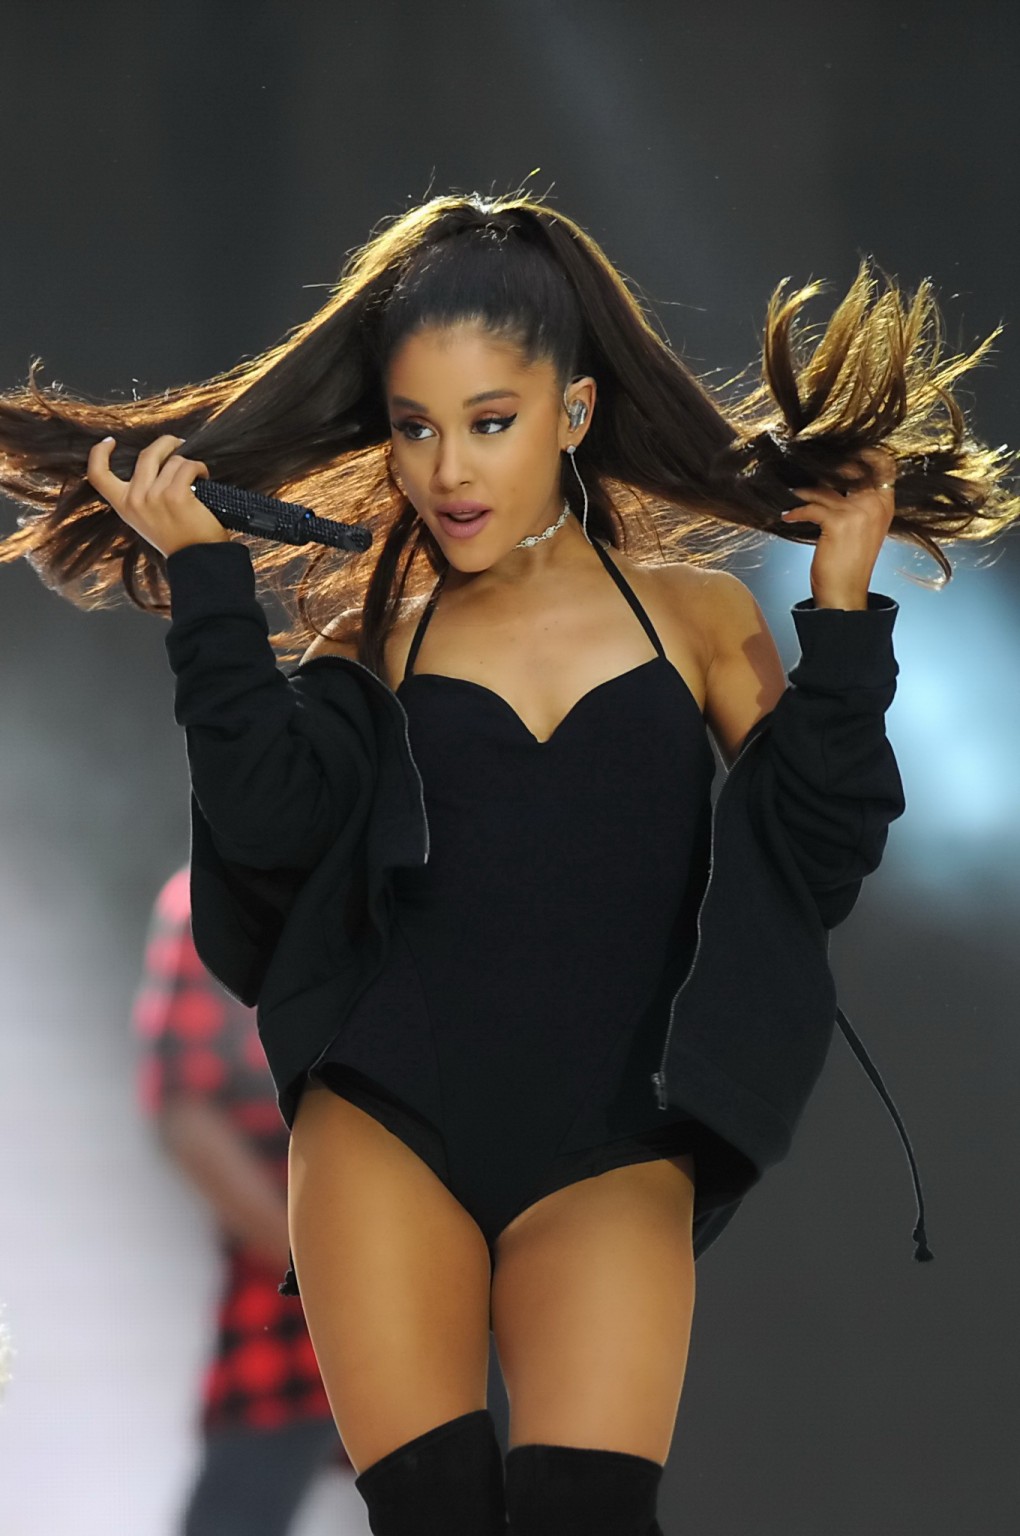 Ariana Grande shows off her shaved pussy in a tiny black outfit while performing #75161992